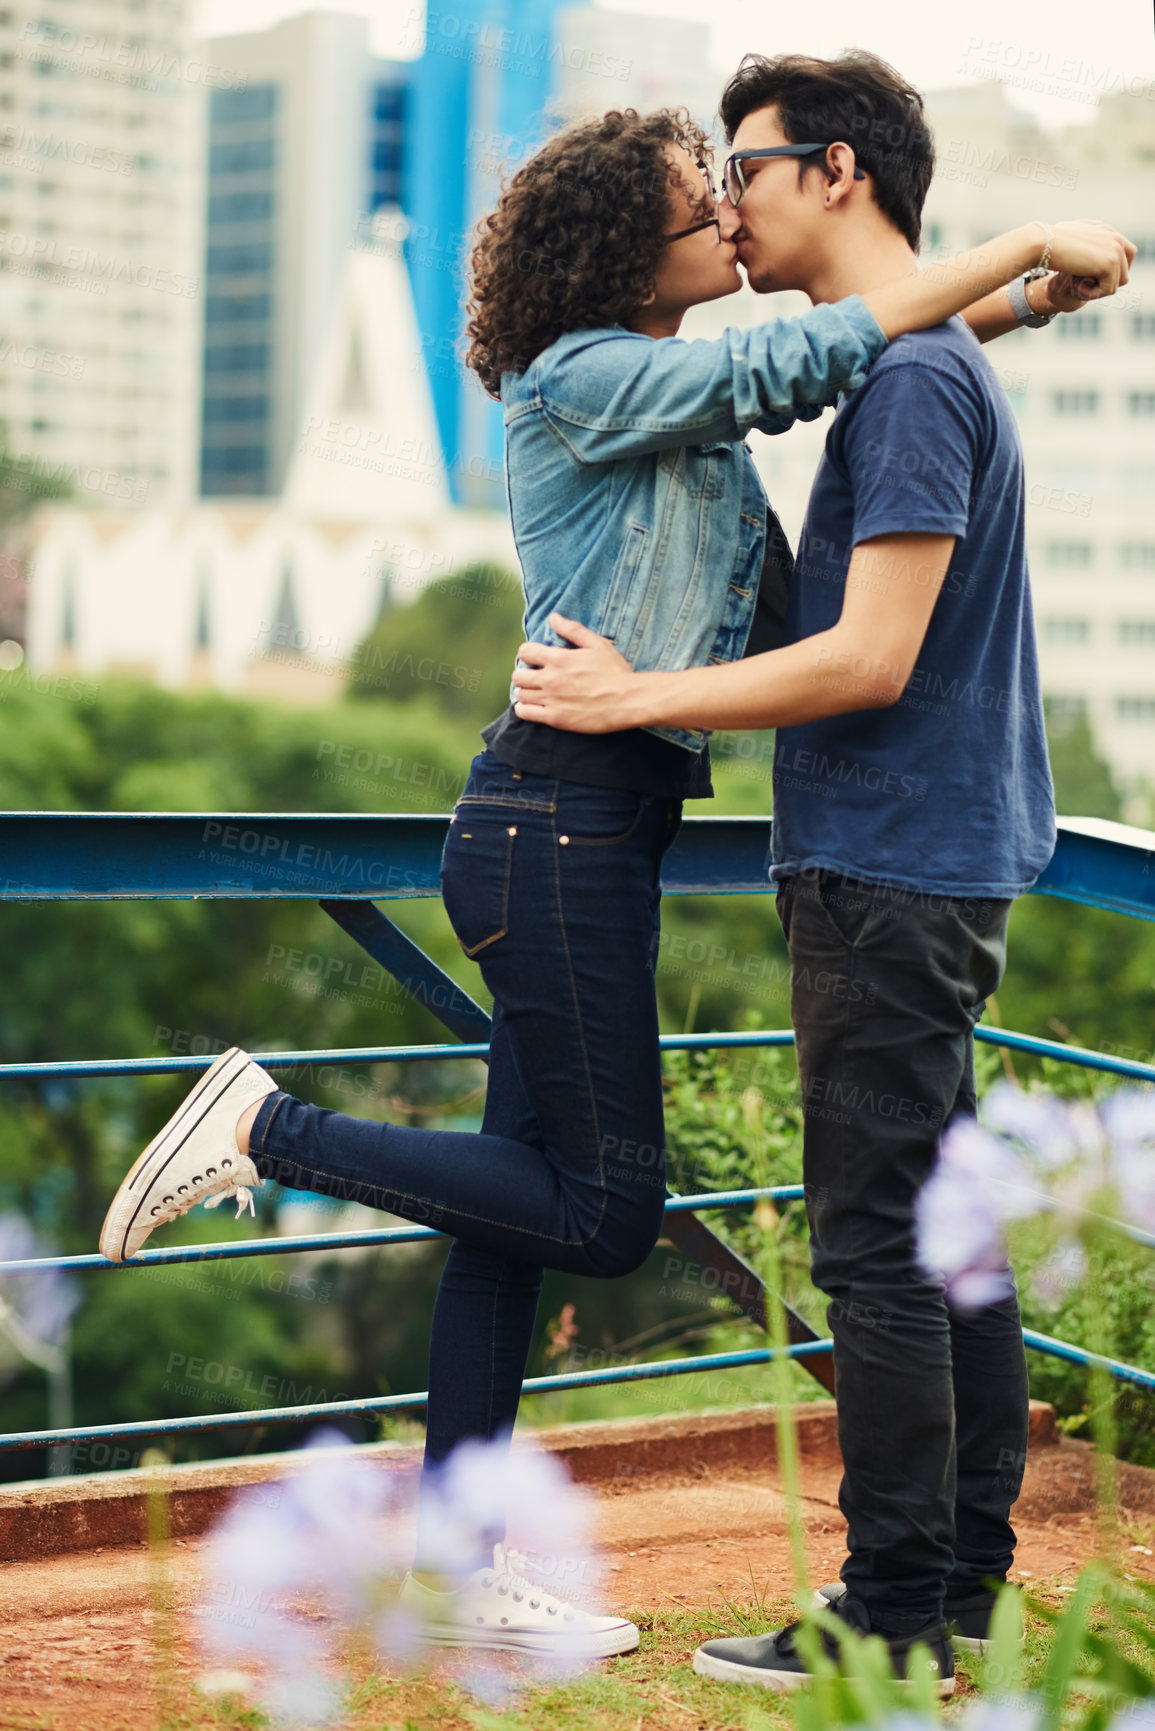 Buy stock photo Shot of a teenage couple kissing outdoors